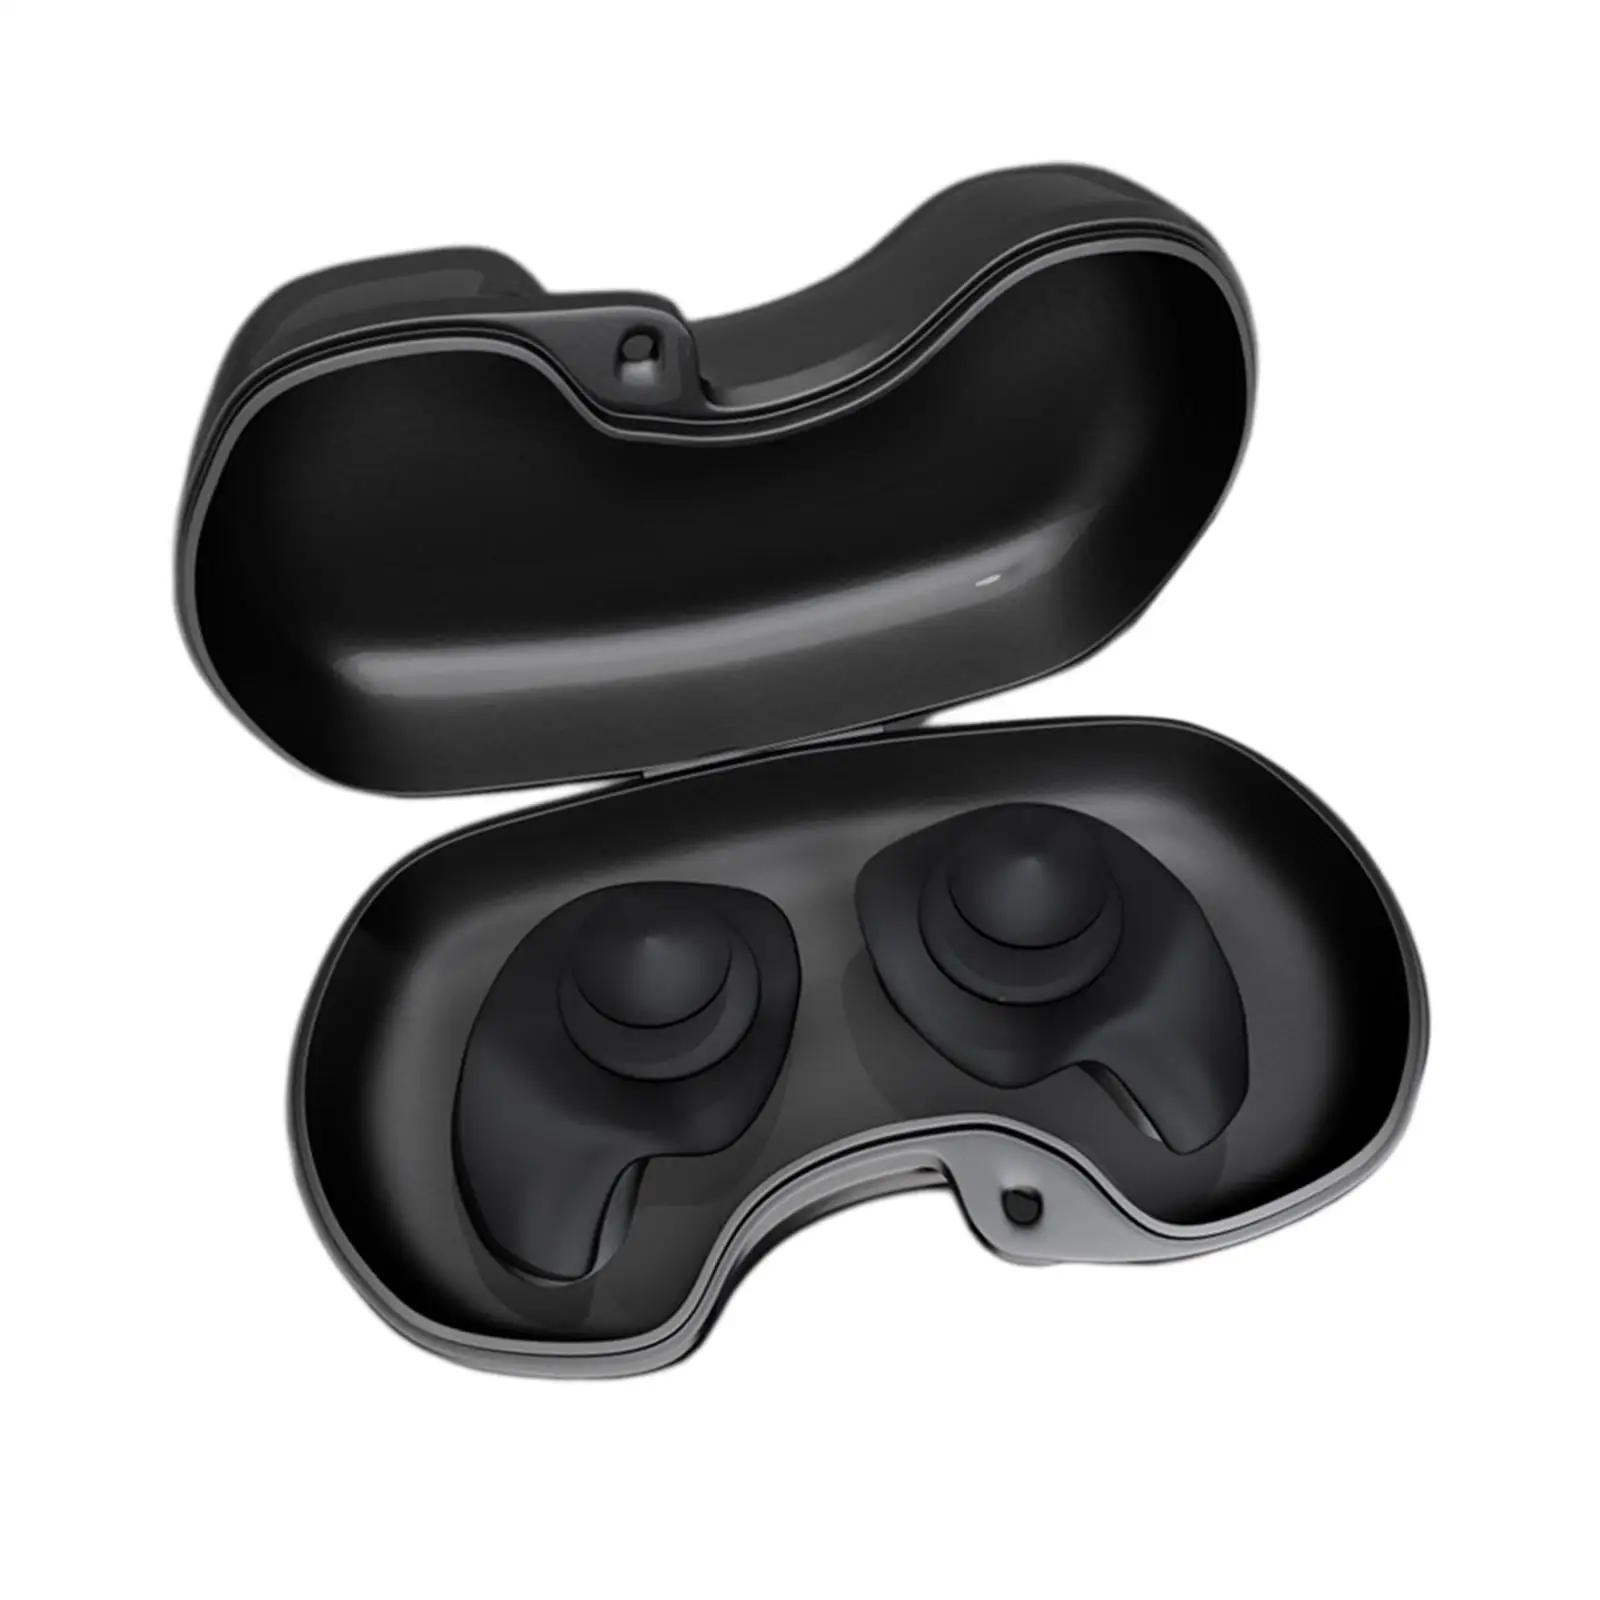 Reusable Silicone Swimming Ear Plugs with Case for Underwater Women Men Teens Youth